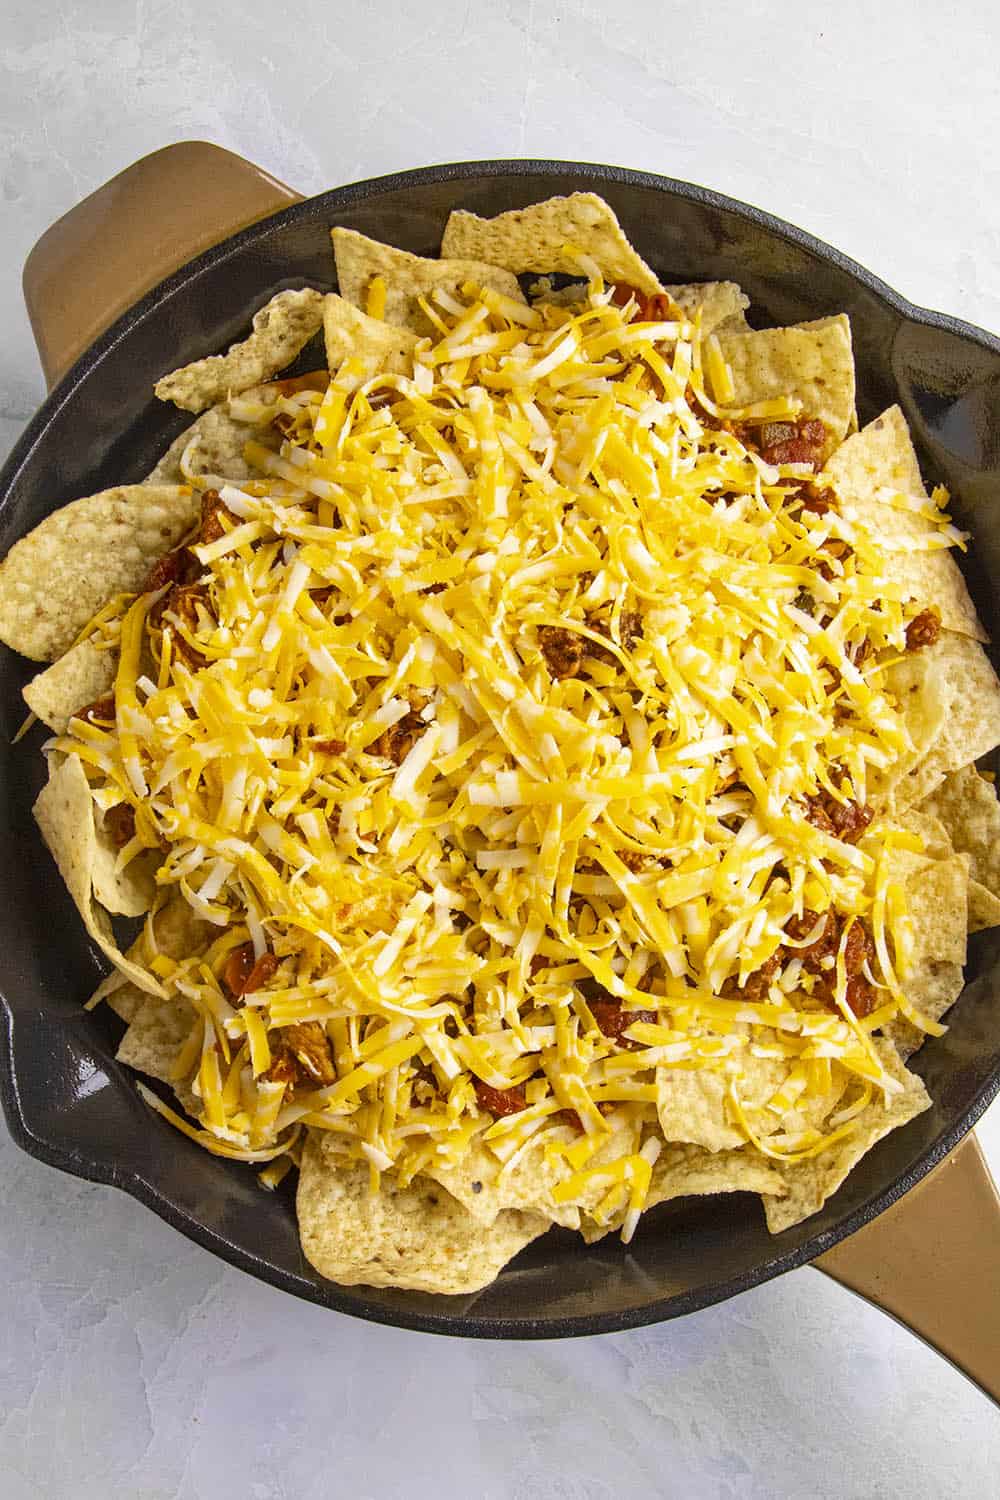 Add the shredded cheese over the Chipotle Chicken Nachos